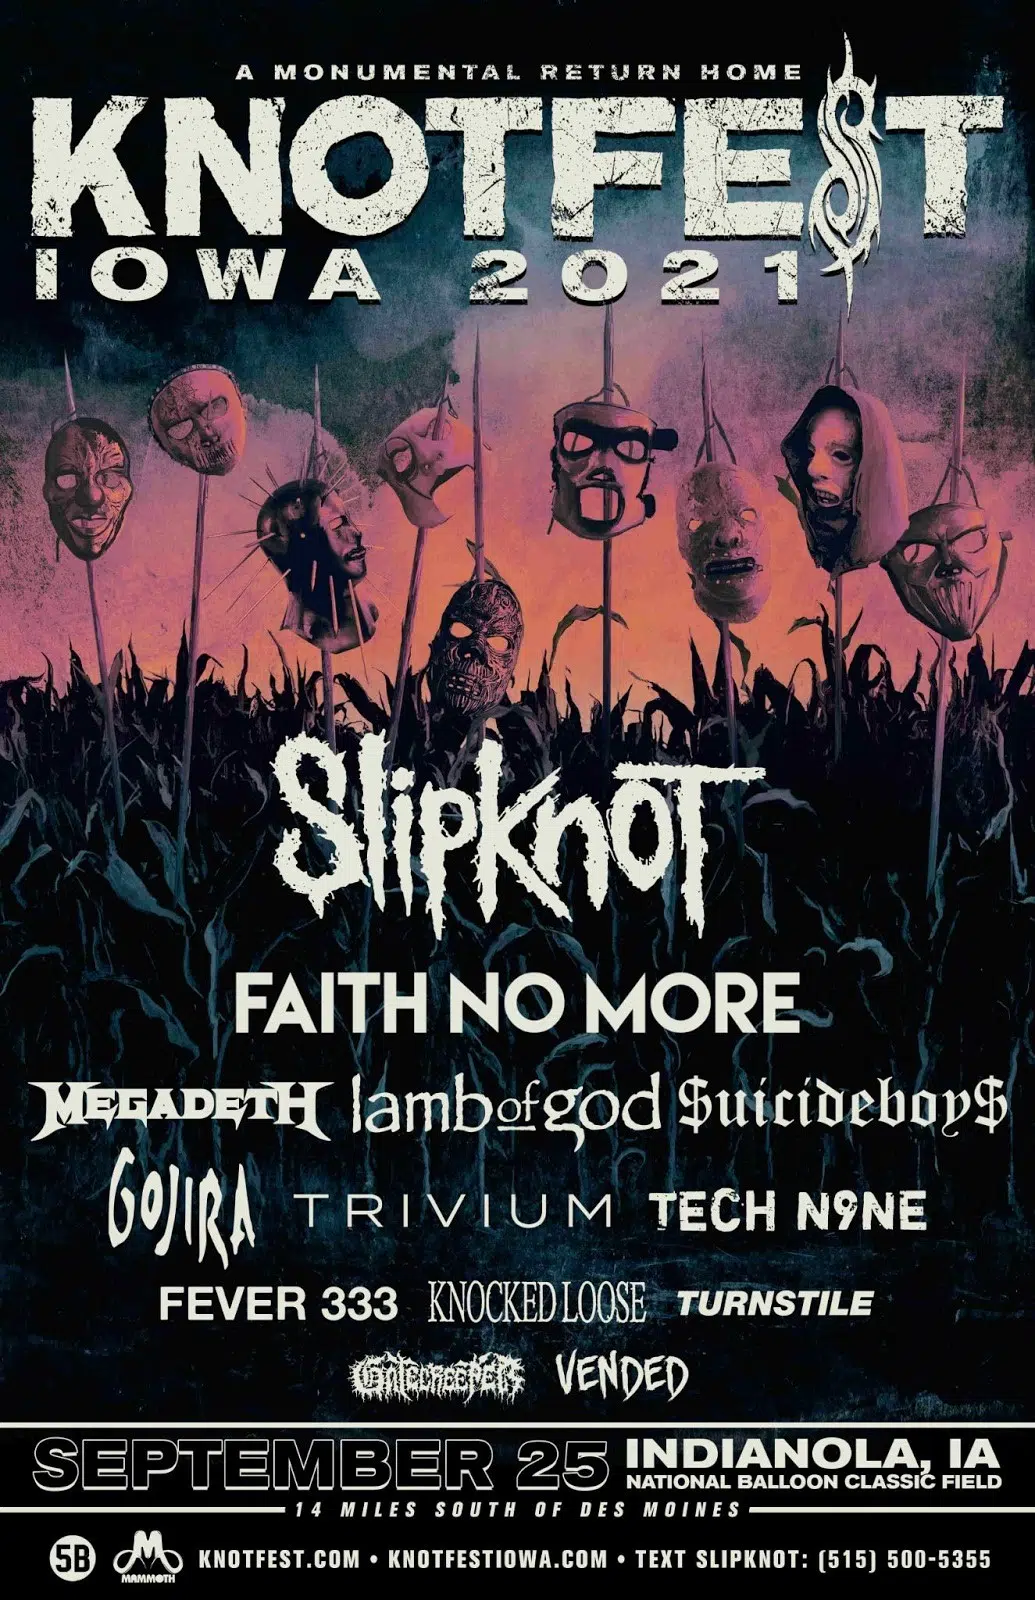 THE RETURN OF KNOTFEST!!